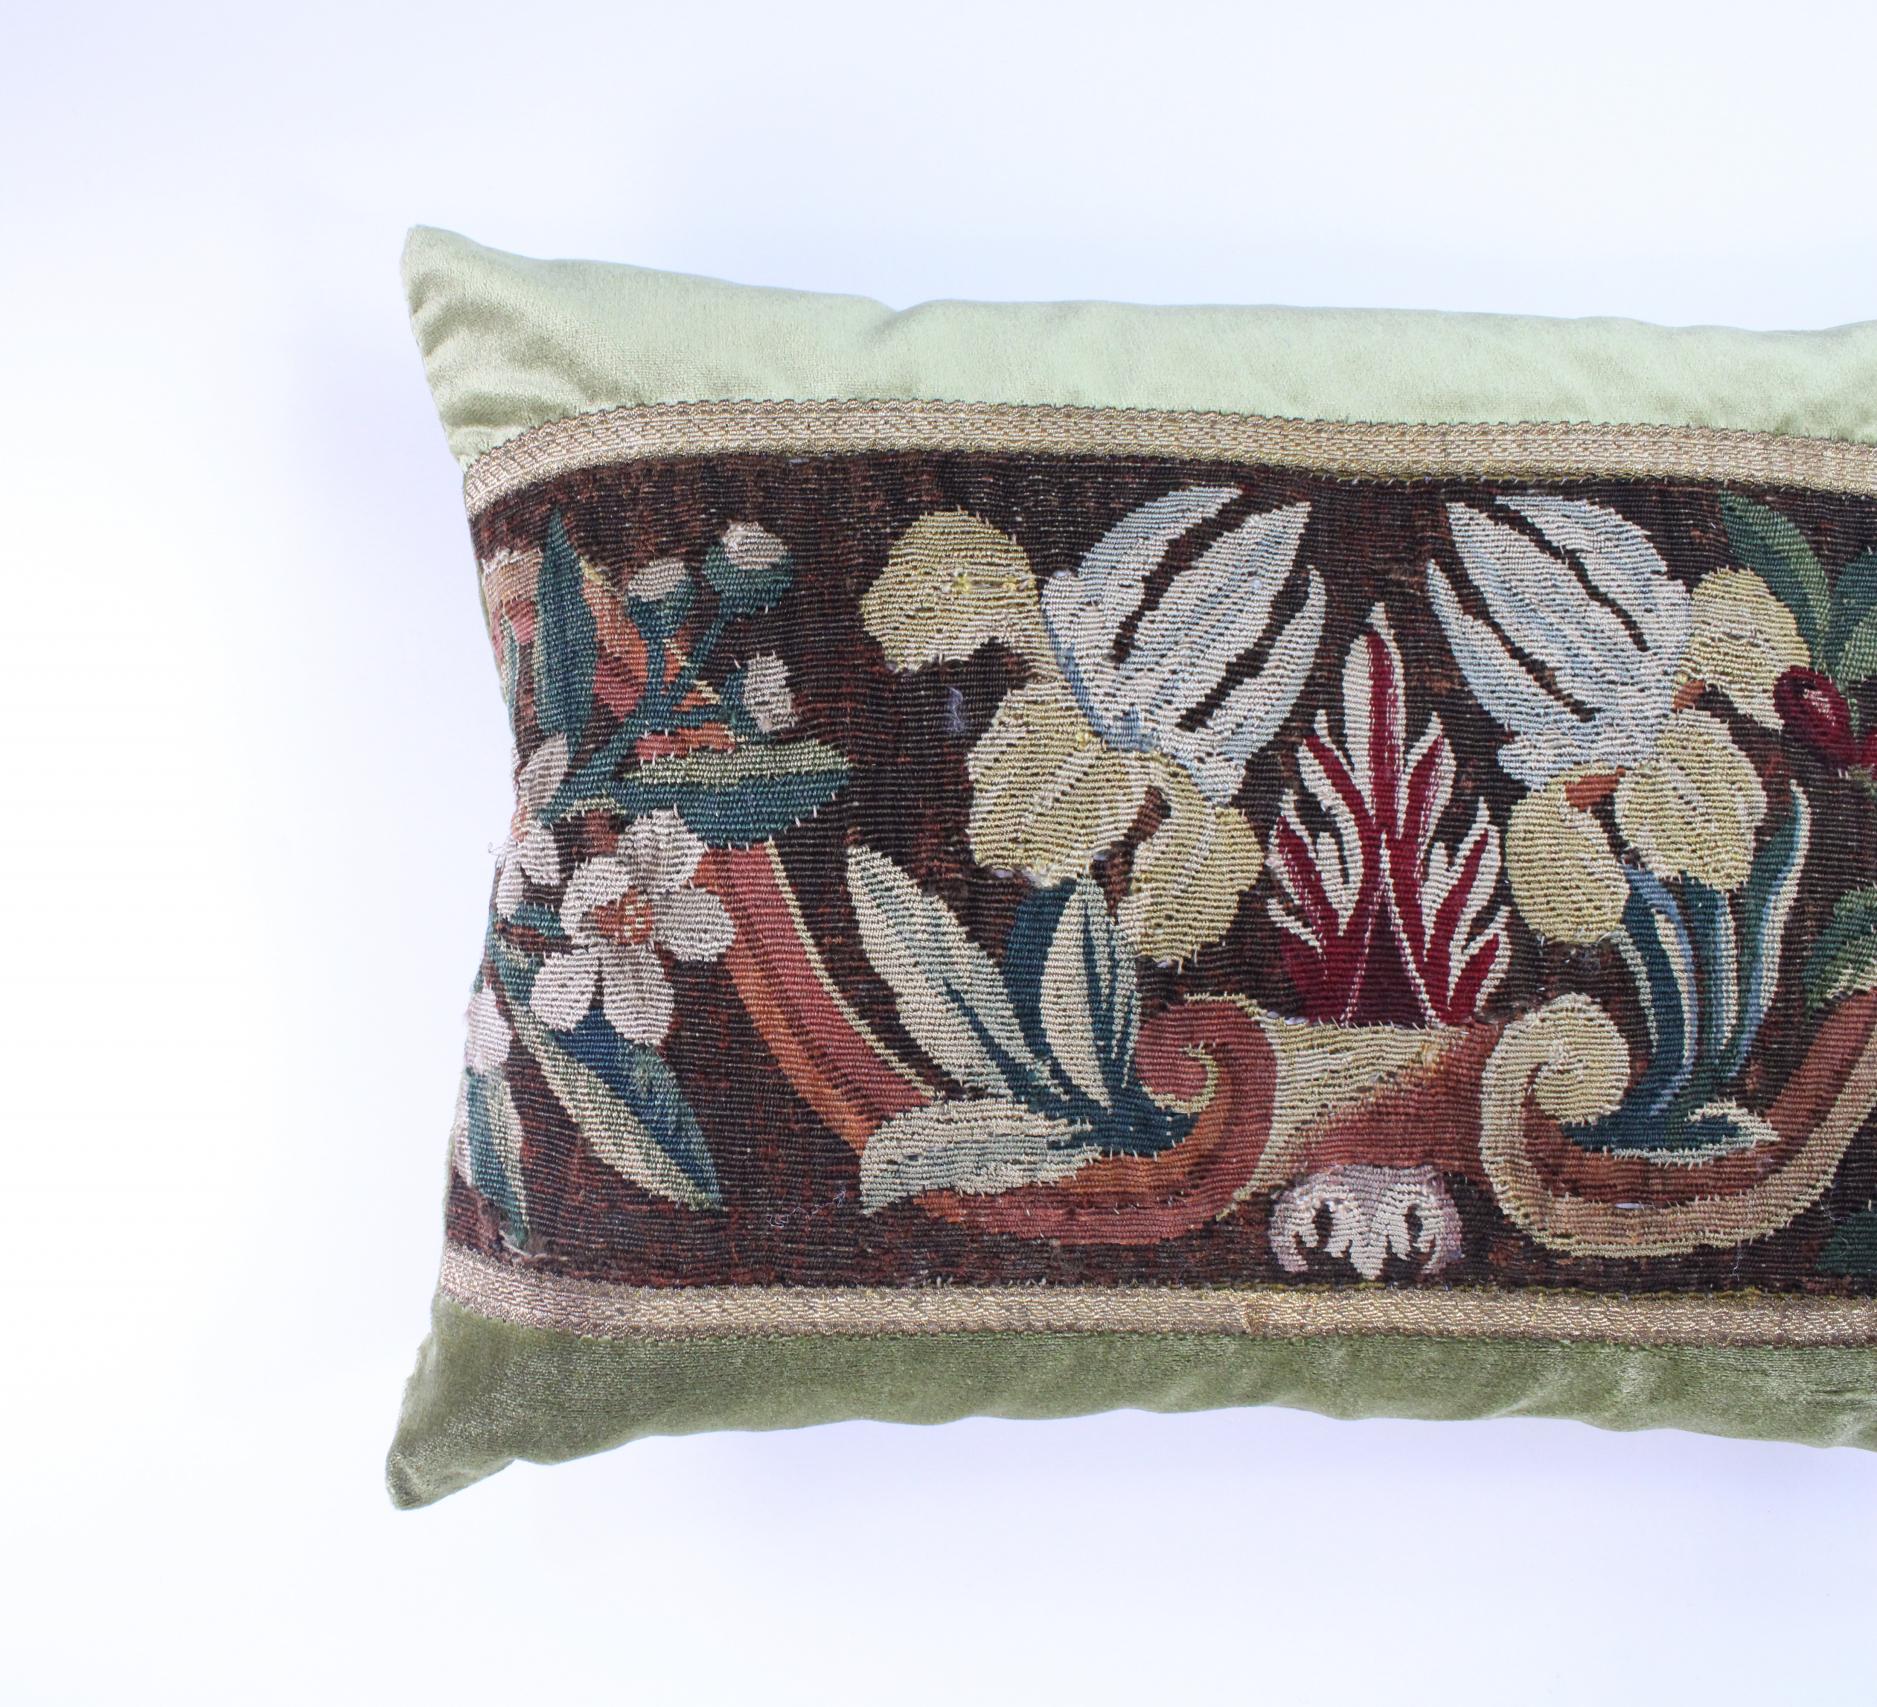 Wear consistent with age and use. This is a new pillow using an antique tapestry piece framed with French gold gallon and gorgeous Schumacher silk velvet. Down filled.